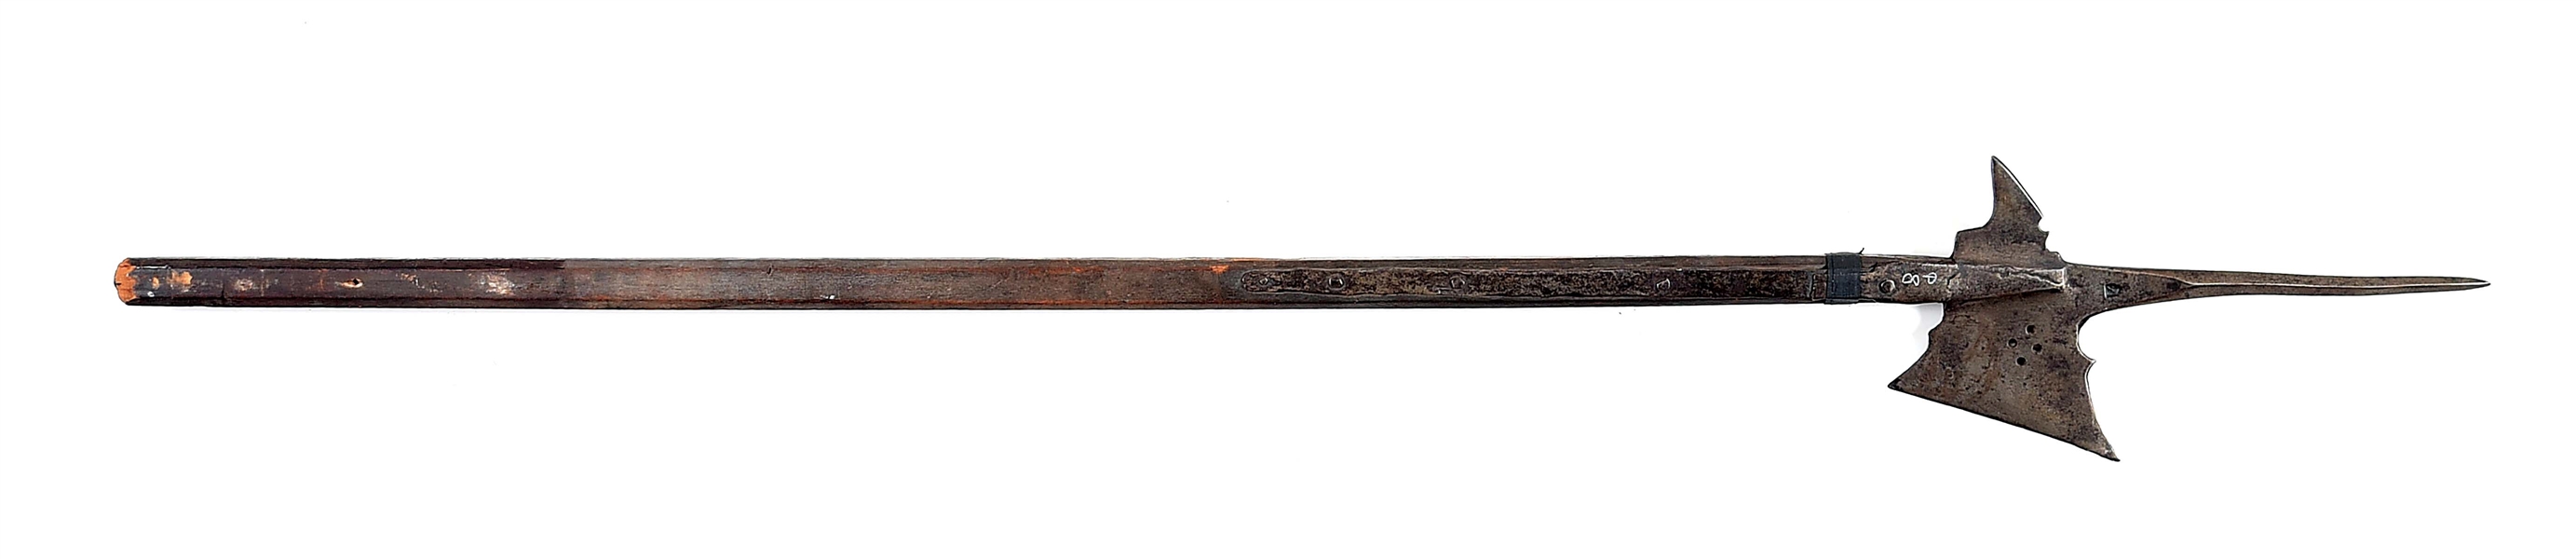 GERMAN STYLE HALBERD WITH PUNCHED DECORATIONS AND A DEEPLY STRUCK ARMORERS MARK.